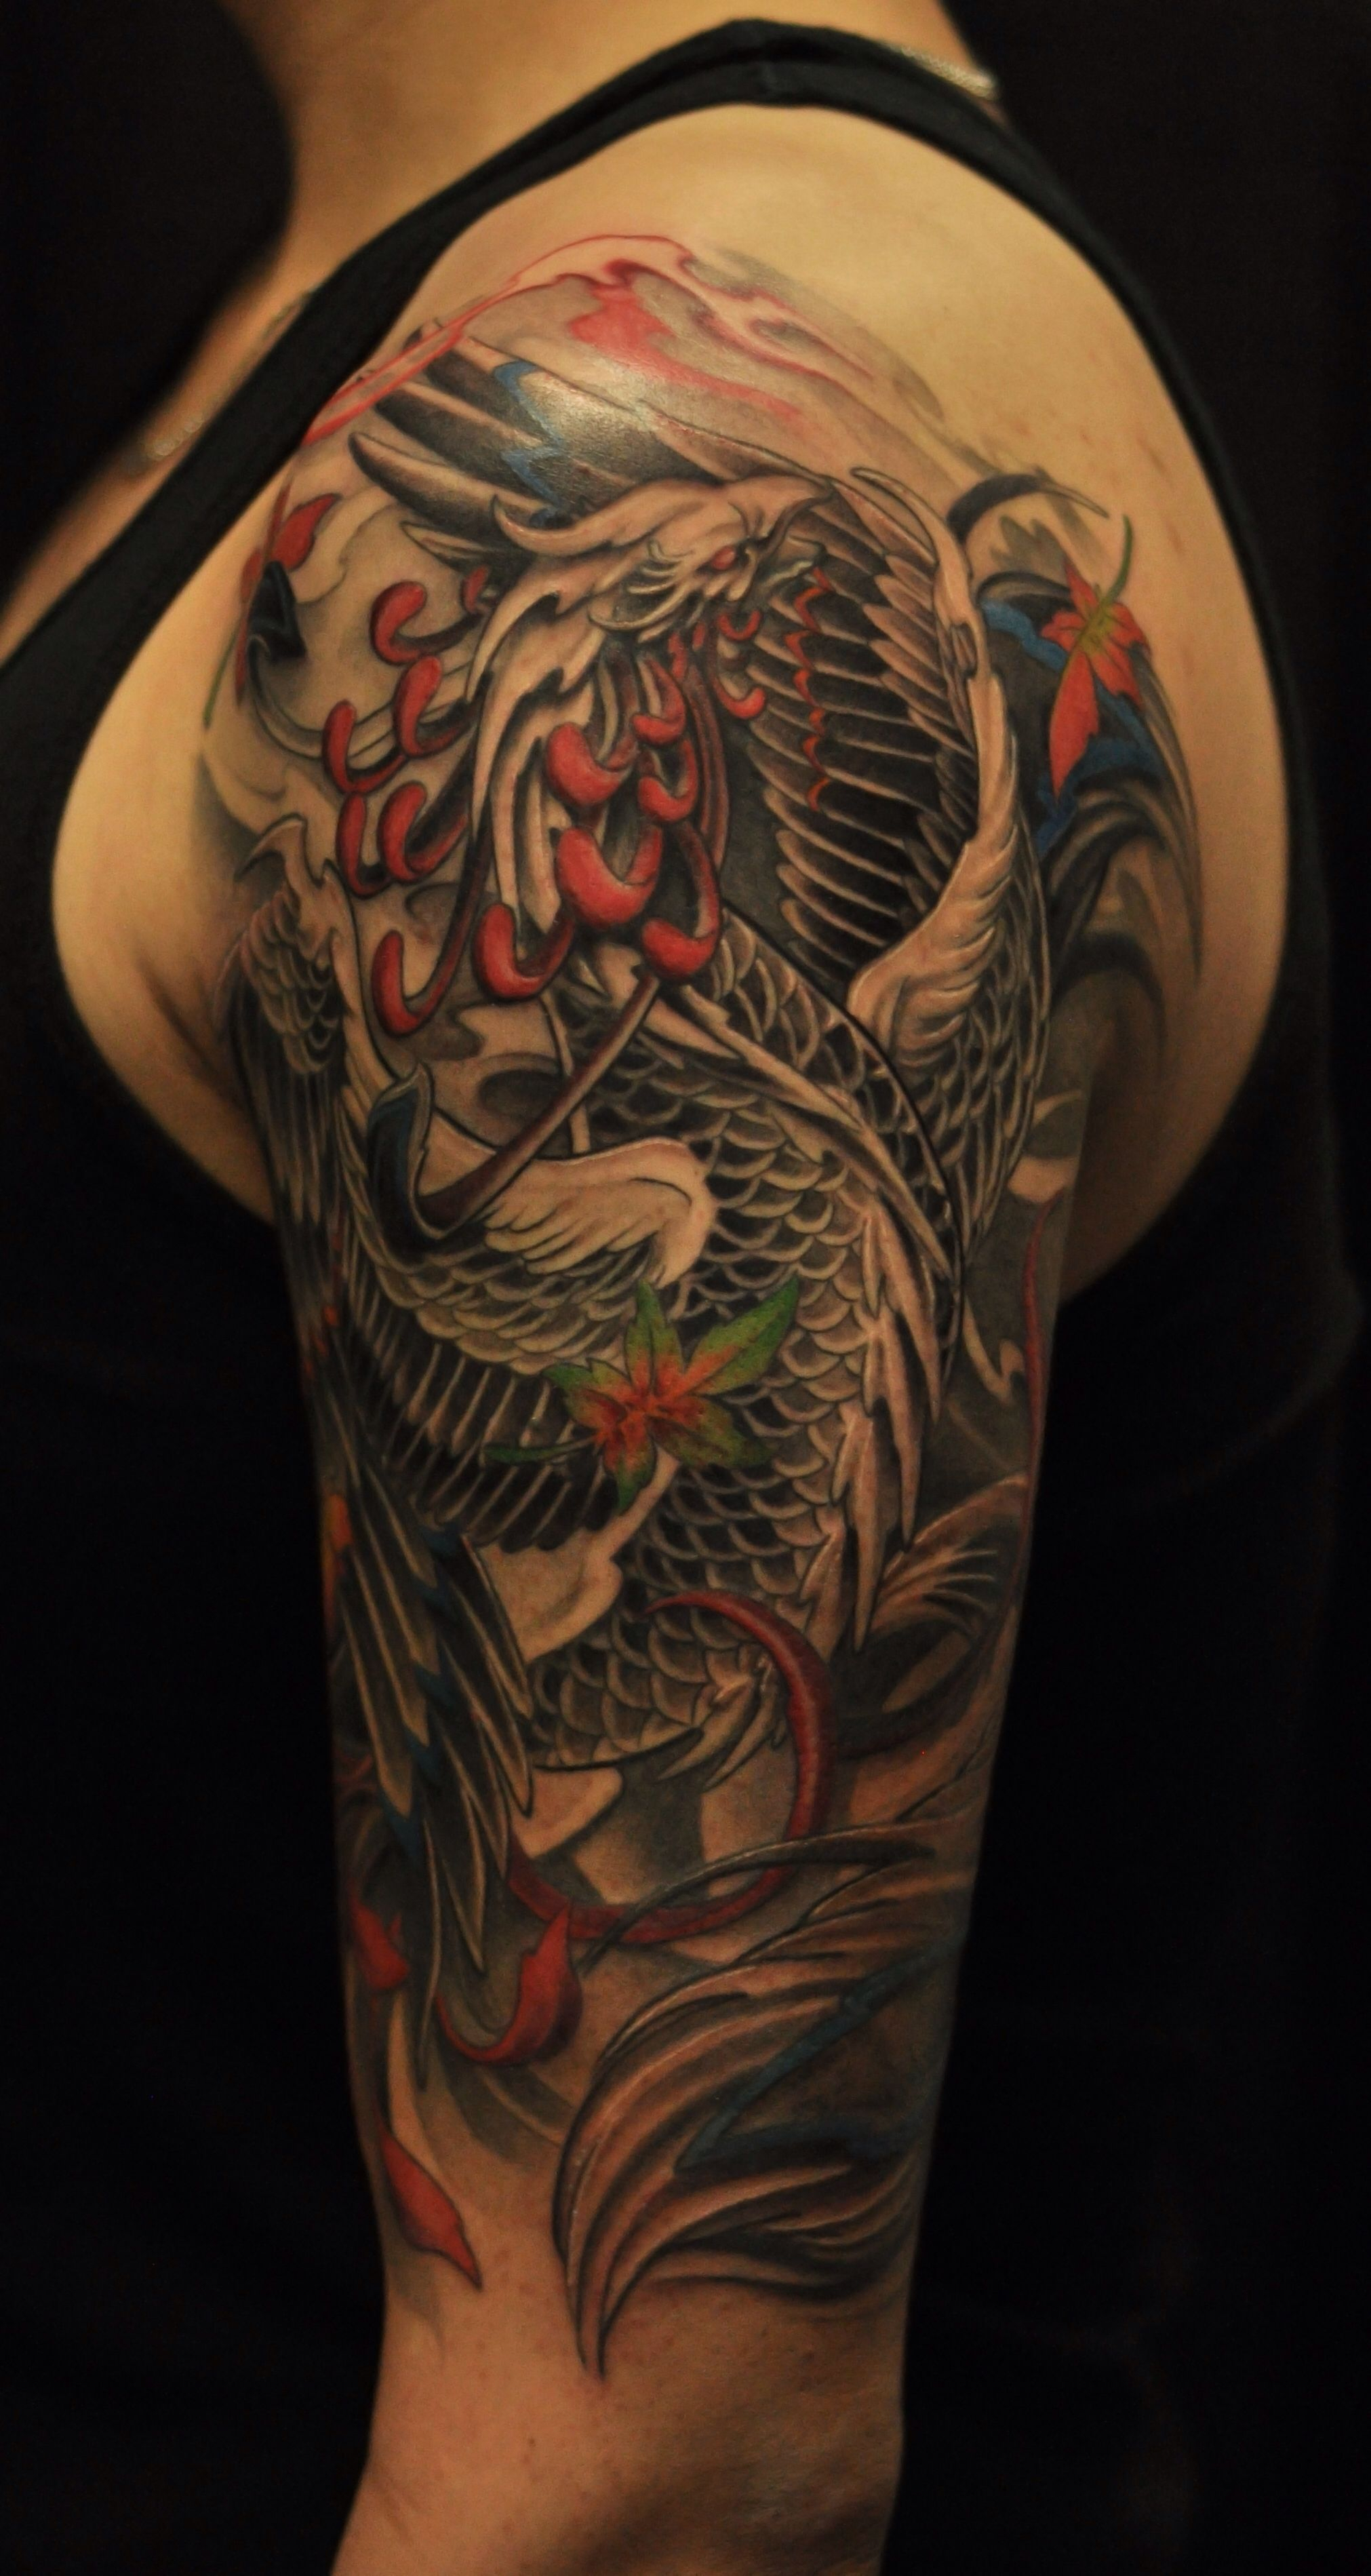 This Is One Of The Coolest Phoenix Tattoos Ive Seen Tattoo in measurements 2022 X 3798